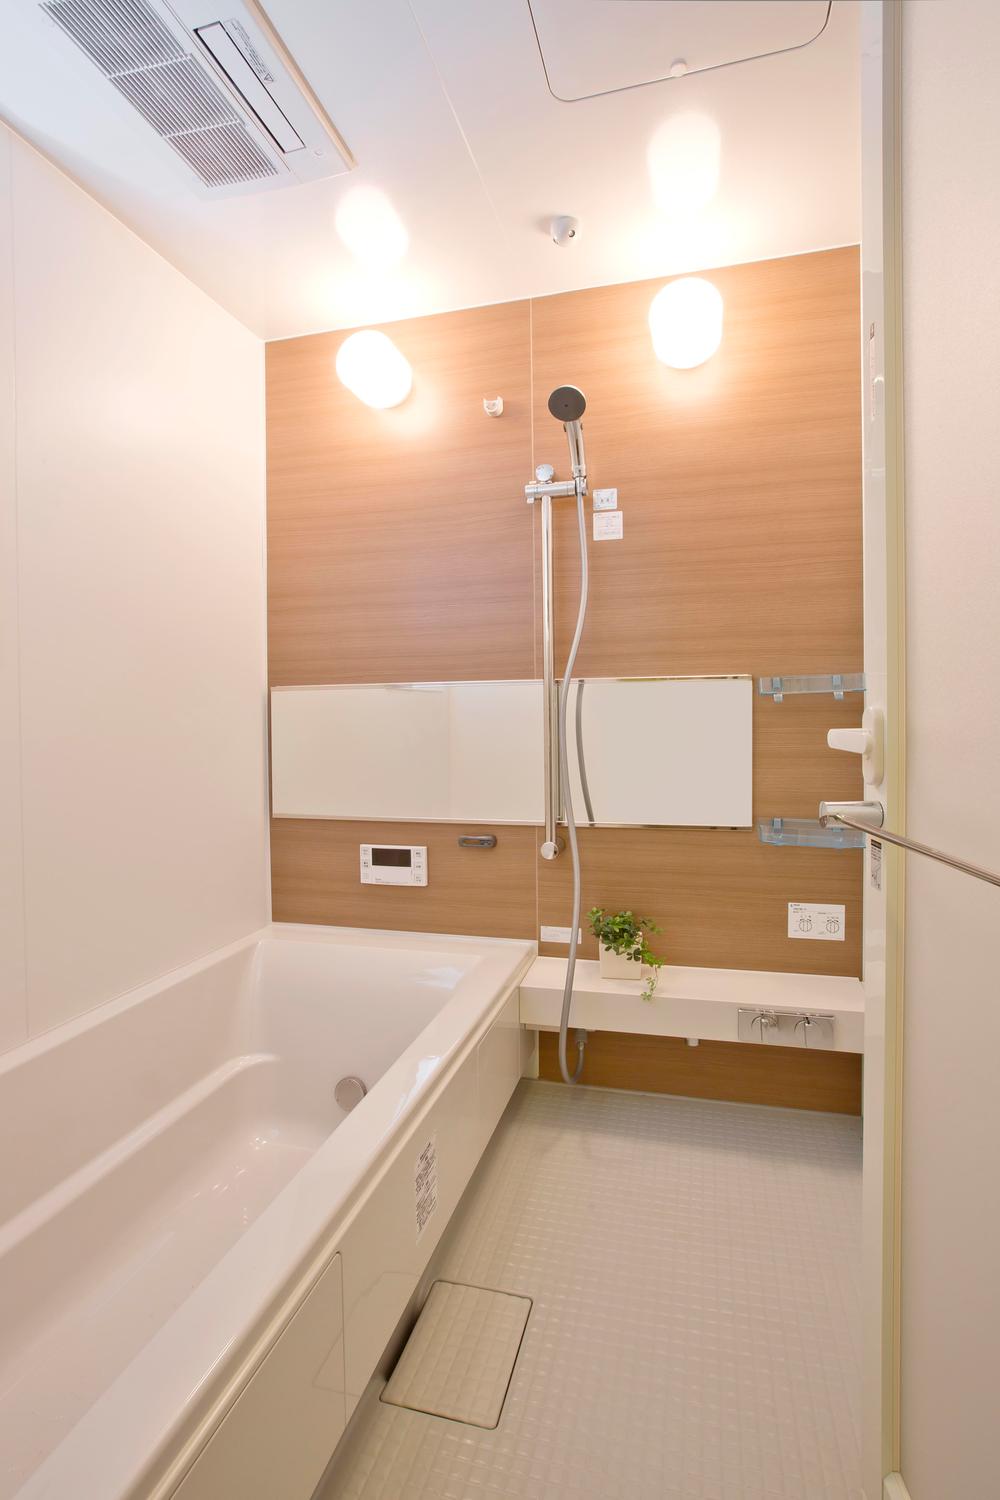 Bathroom. System bathroom that combines the ease of use and design. Yet stylish straight design, Consider the peace of mind and convenience, It is packed comfortable features that ingenuity to every corner.  ※ The color depends on the building. 